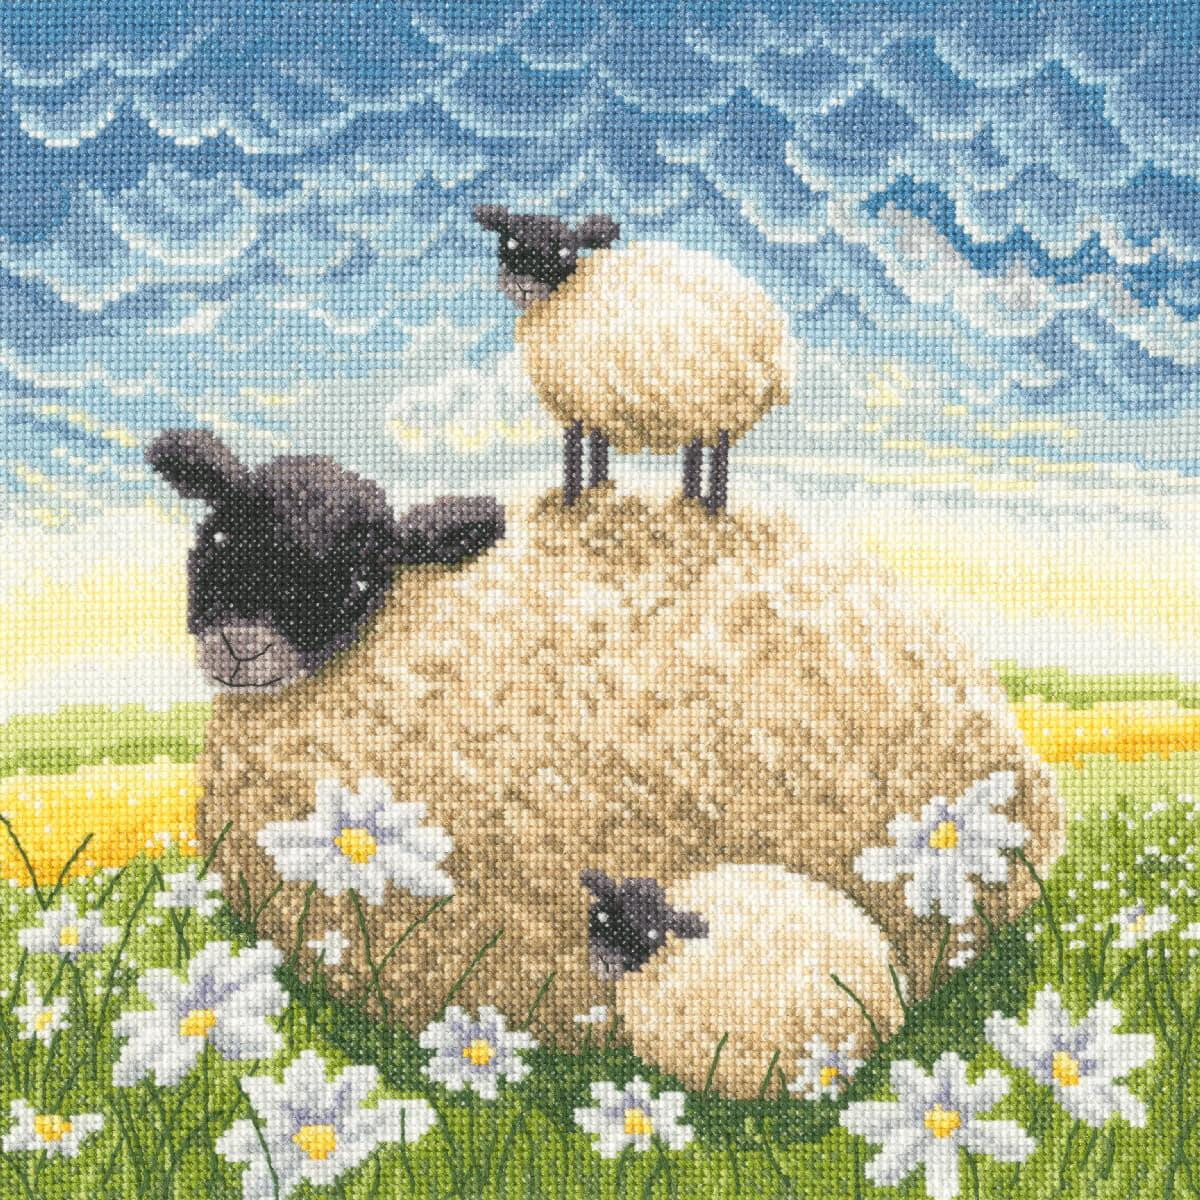 A Bothy Threads embroidery pack shows three sheep in a...